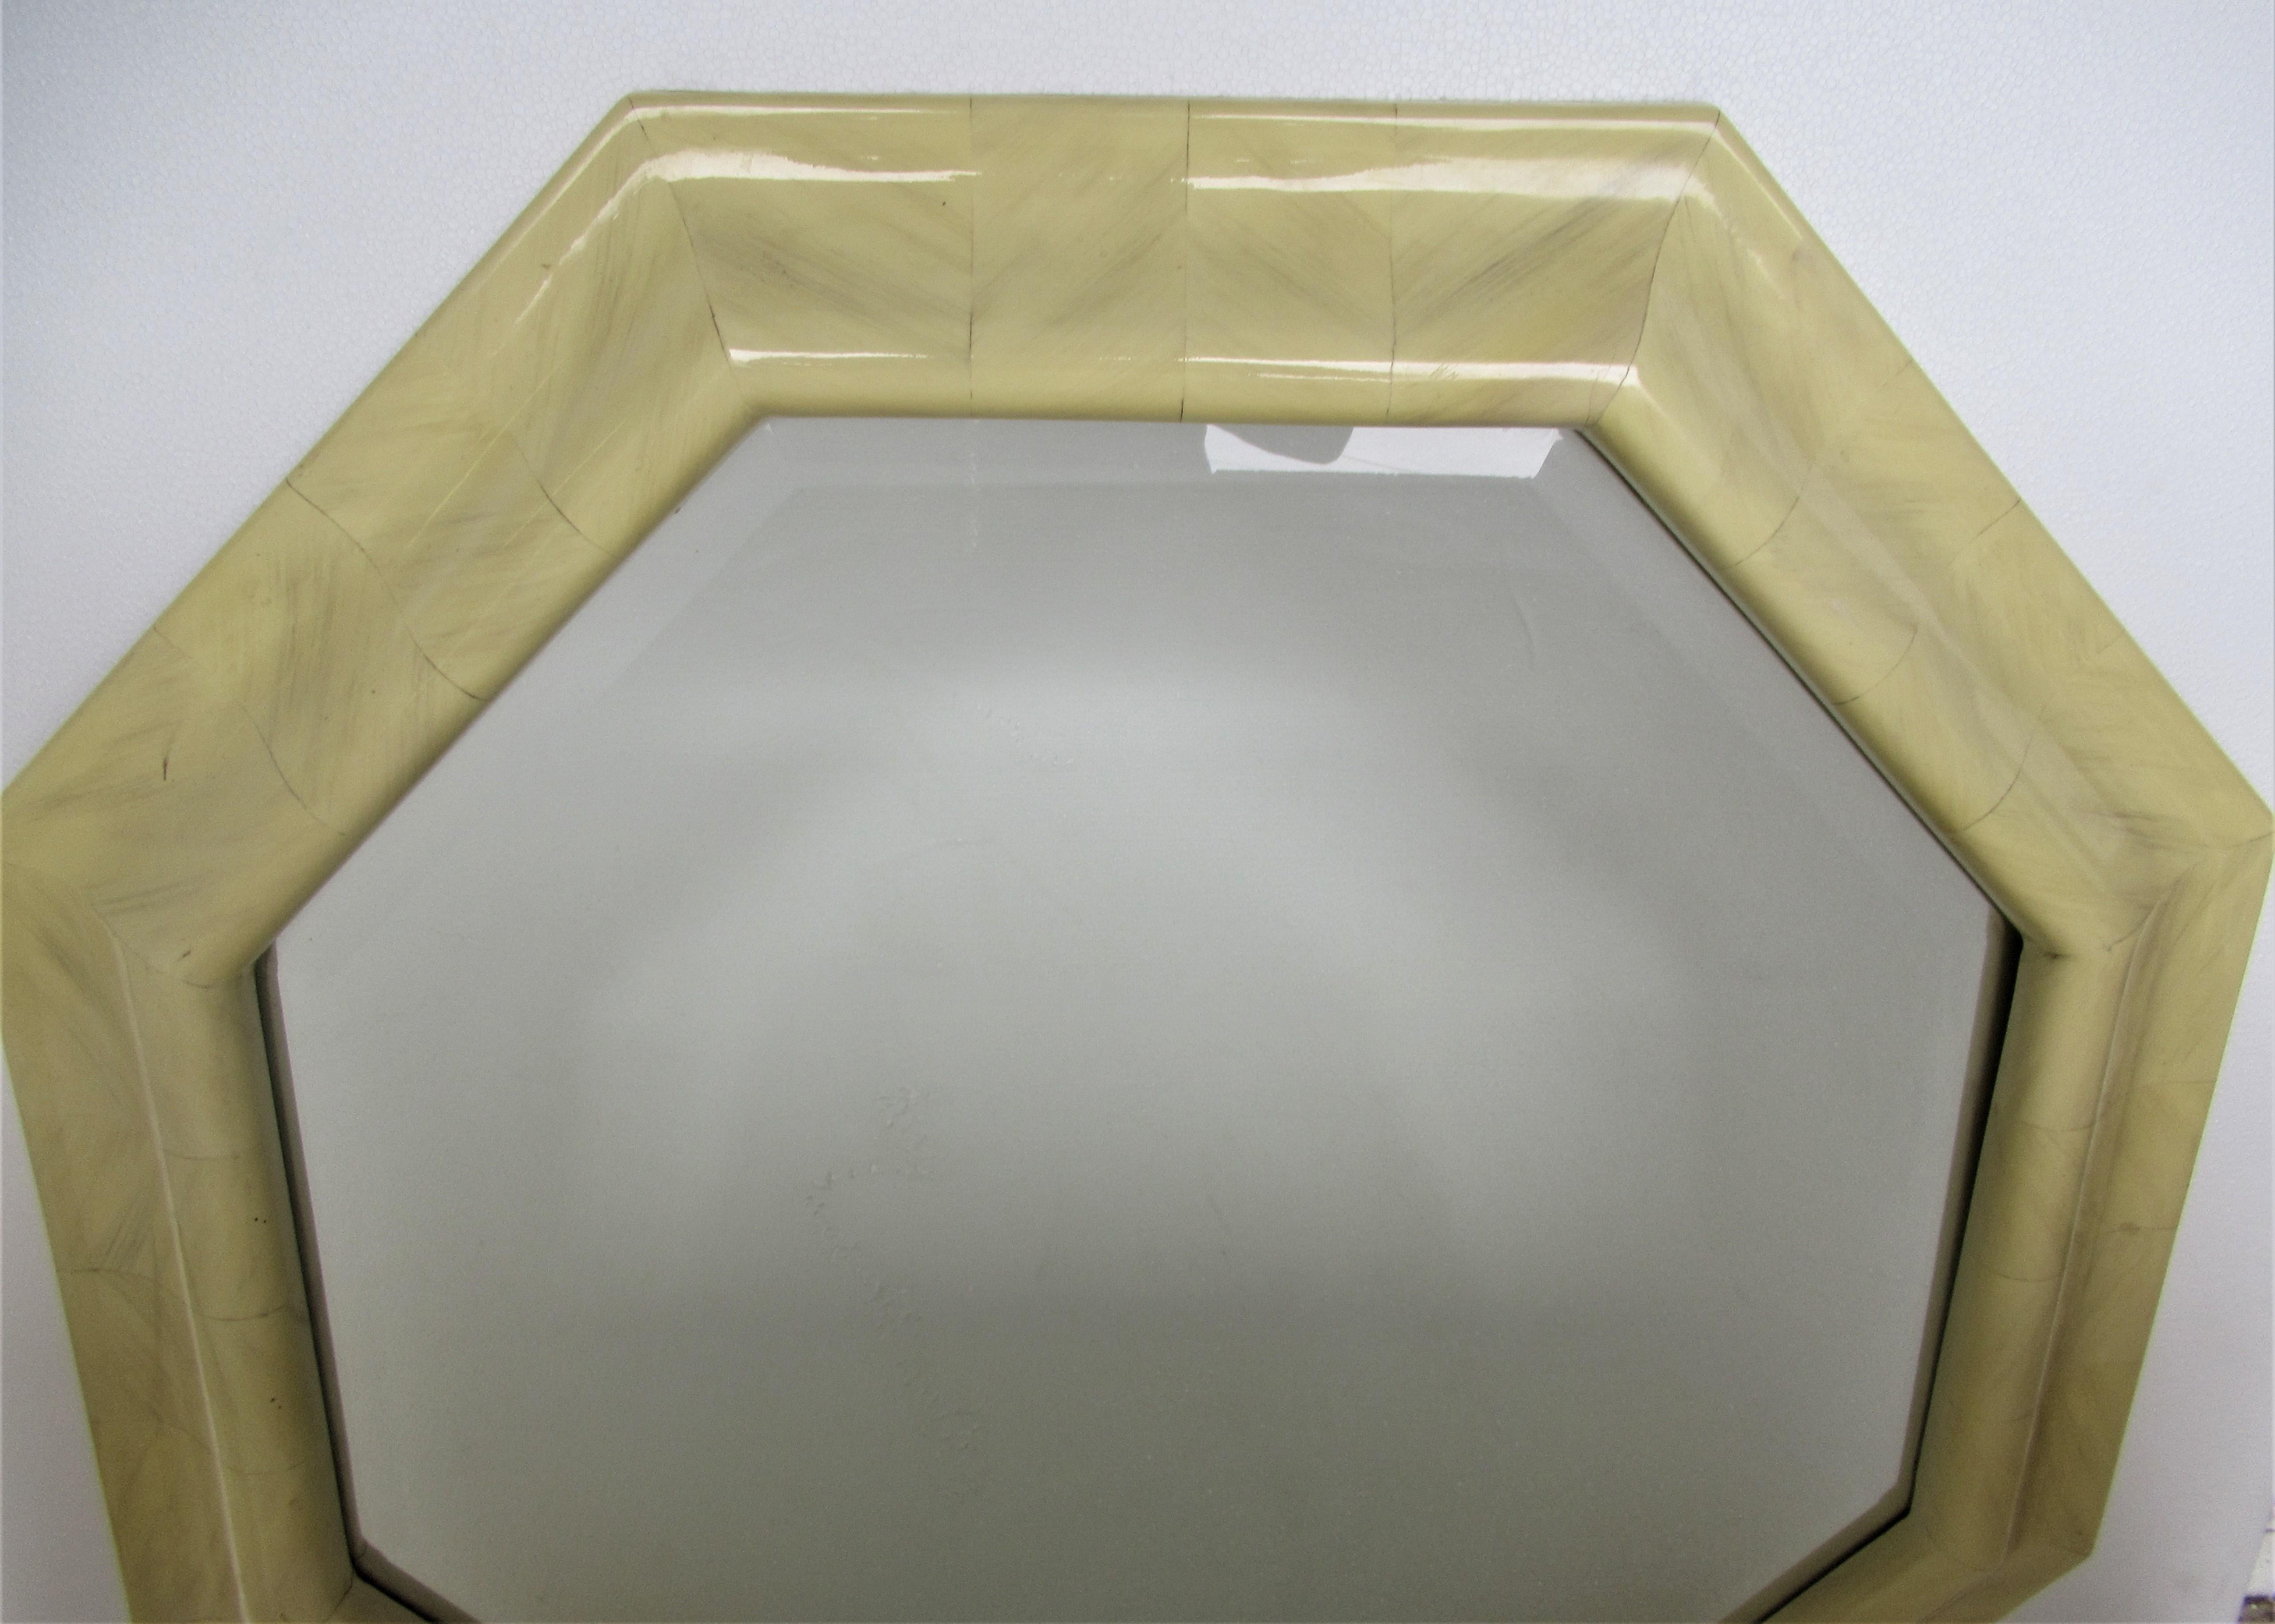 Large 1970s Hollywood Regency shaped octagon frame mirror in lacquered faux ivory parchment resin with beveled plate glass mirror.